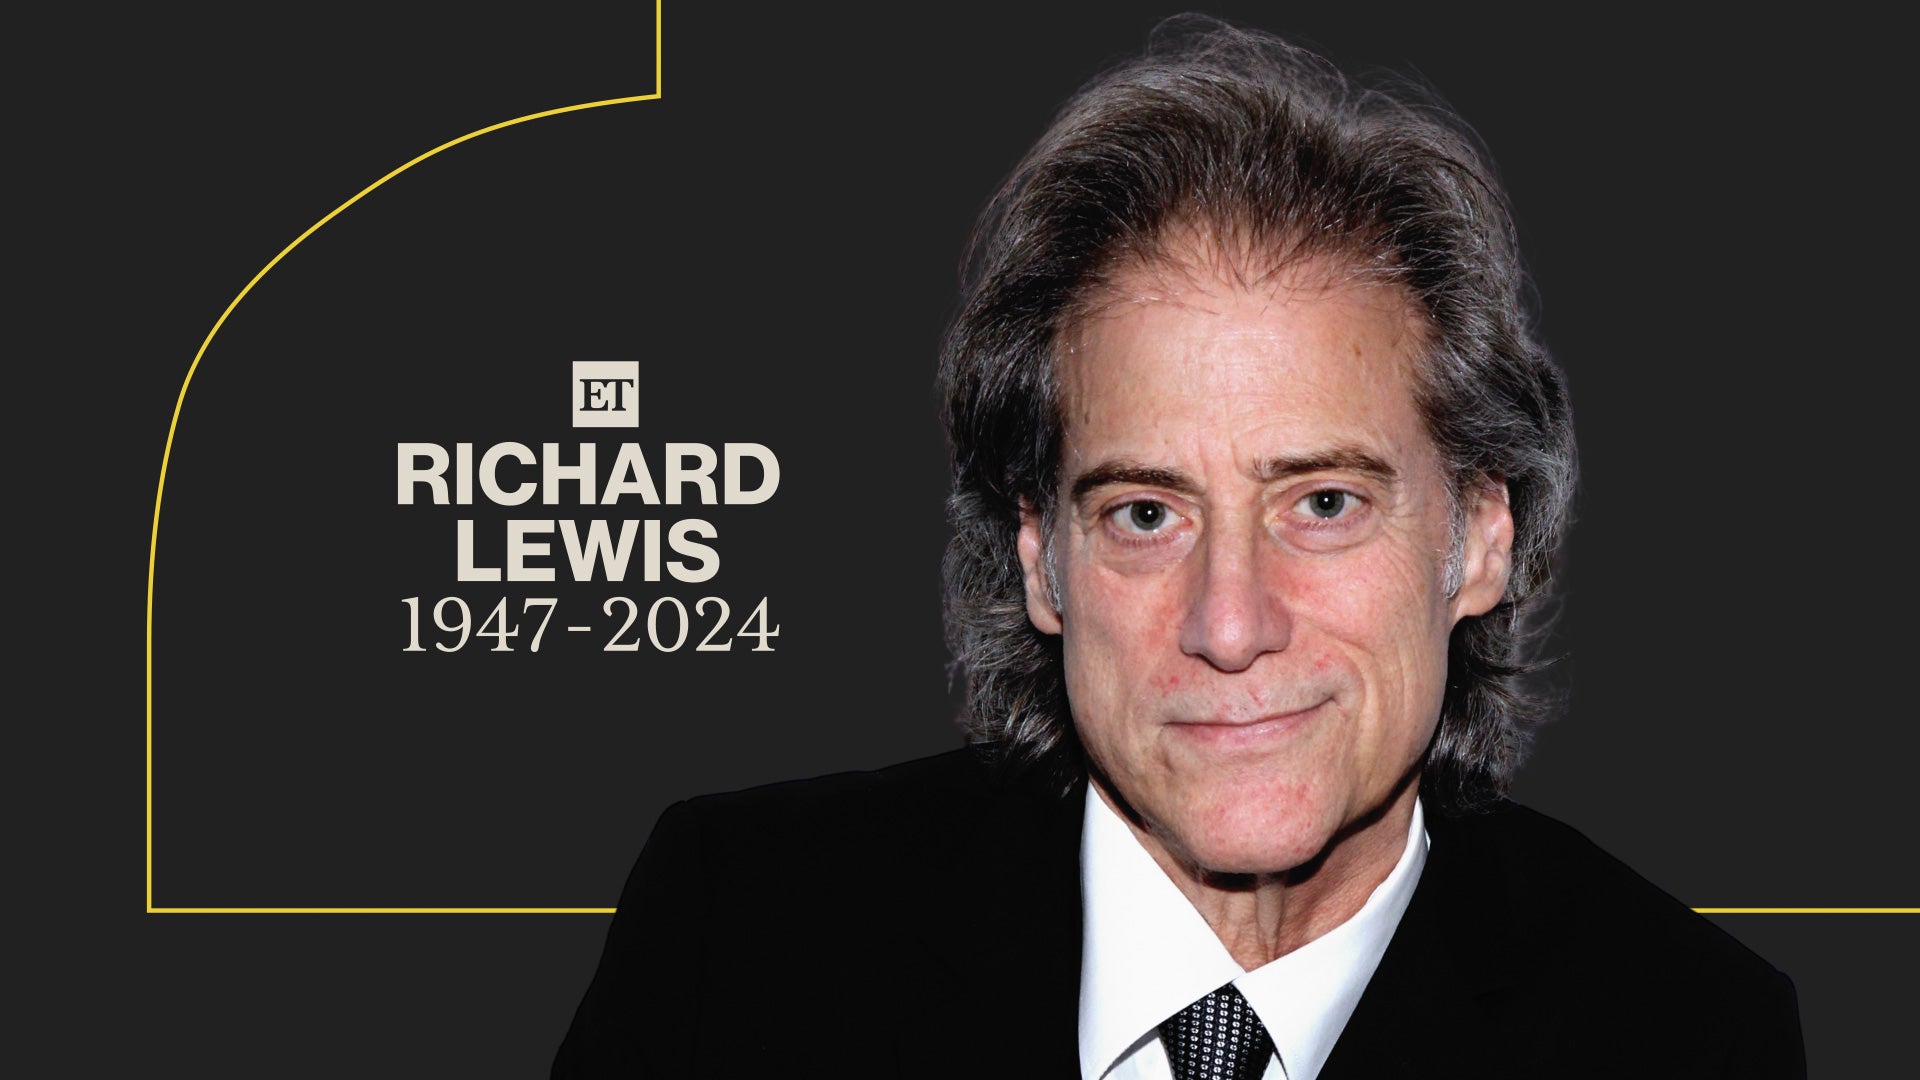 Richard Lewis, 'Curb Your Enthusiasm' Actor, Dead at 76